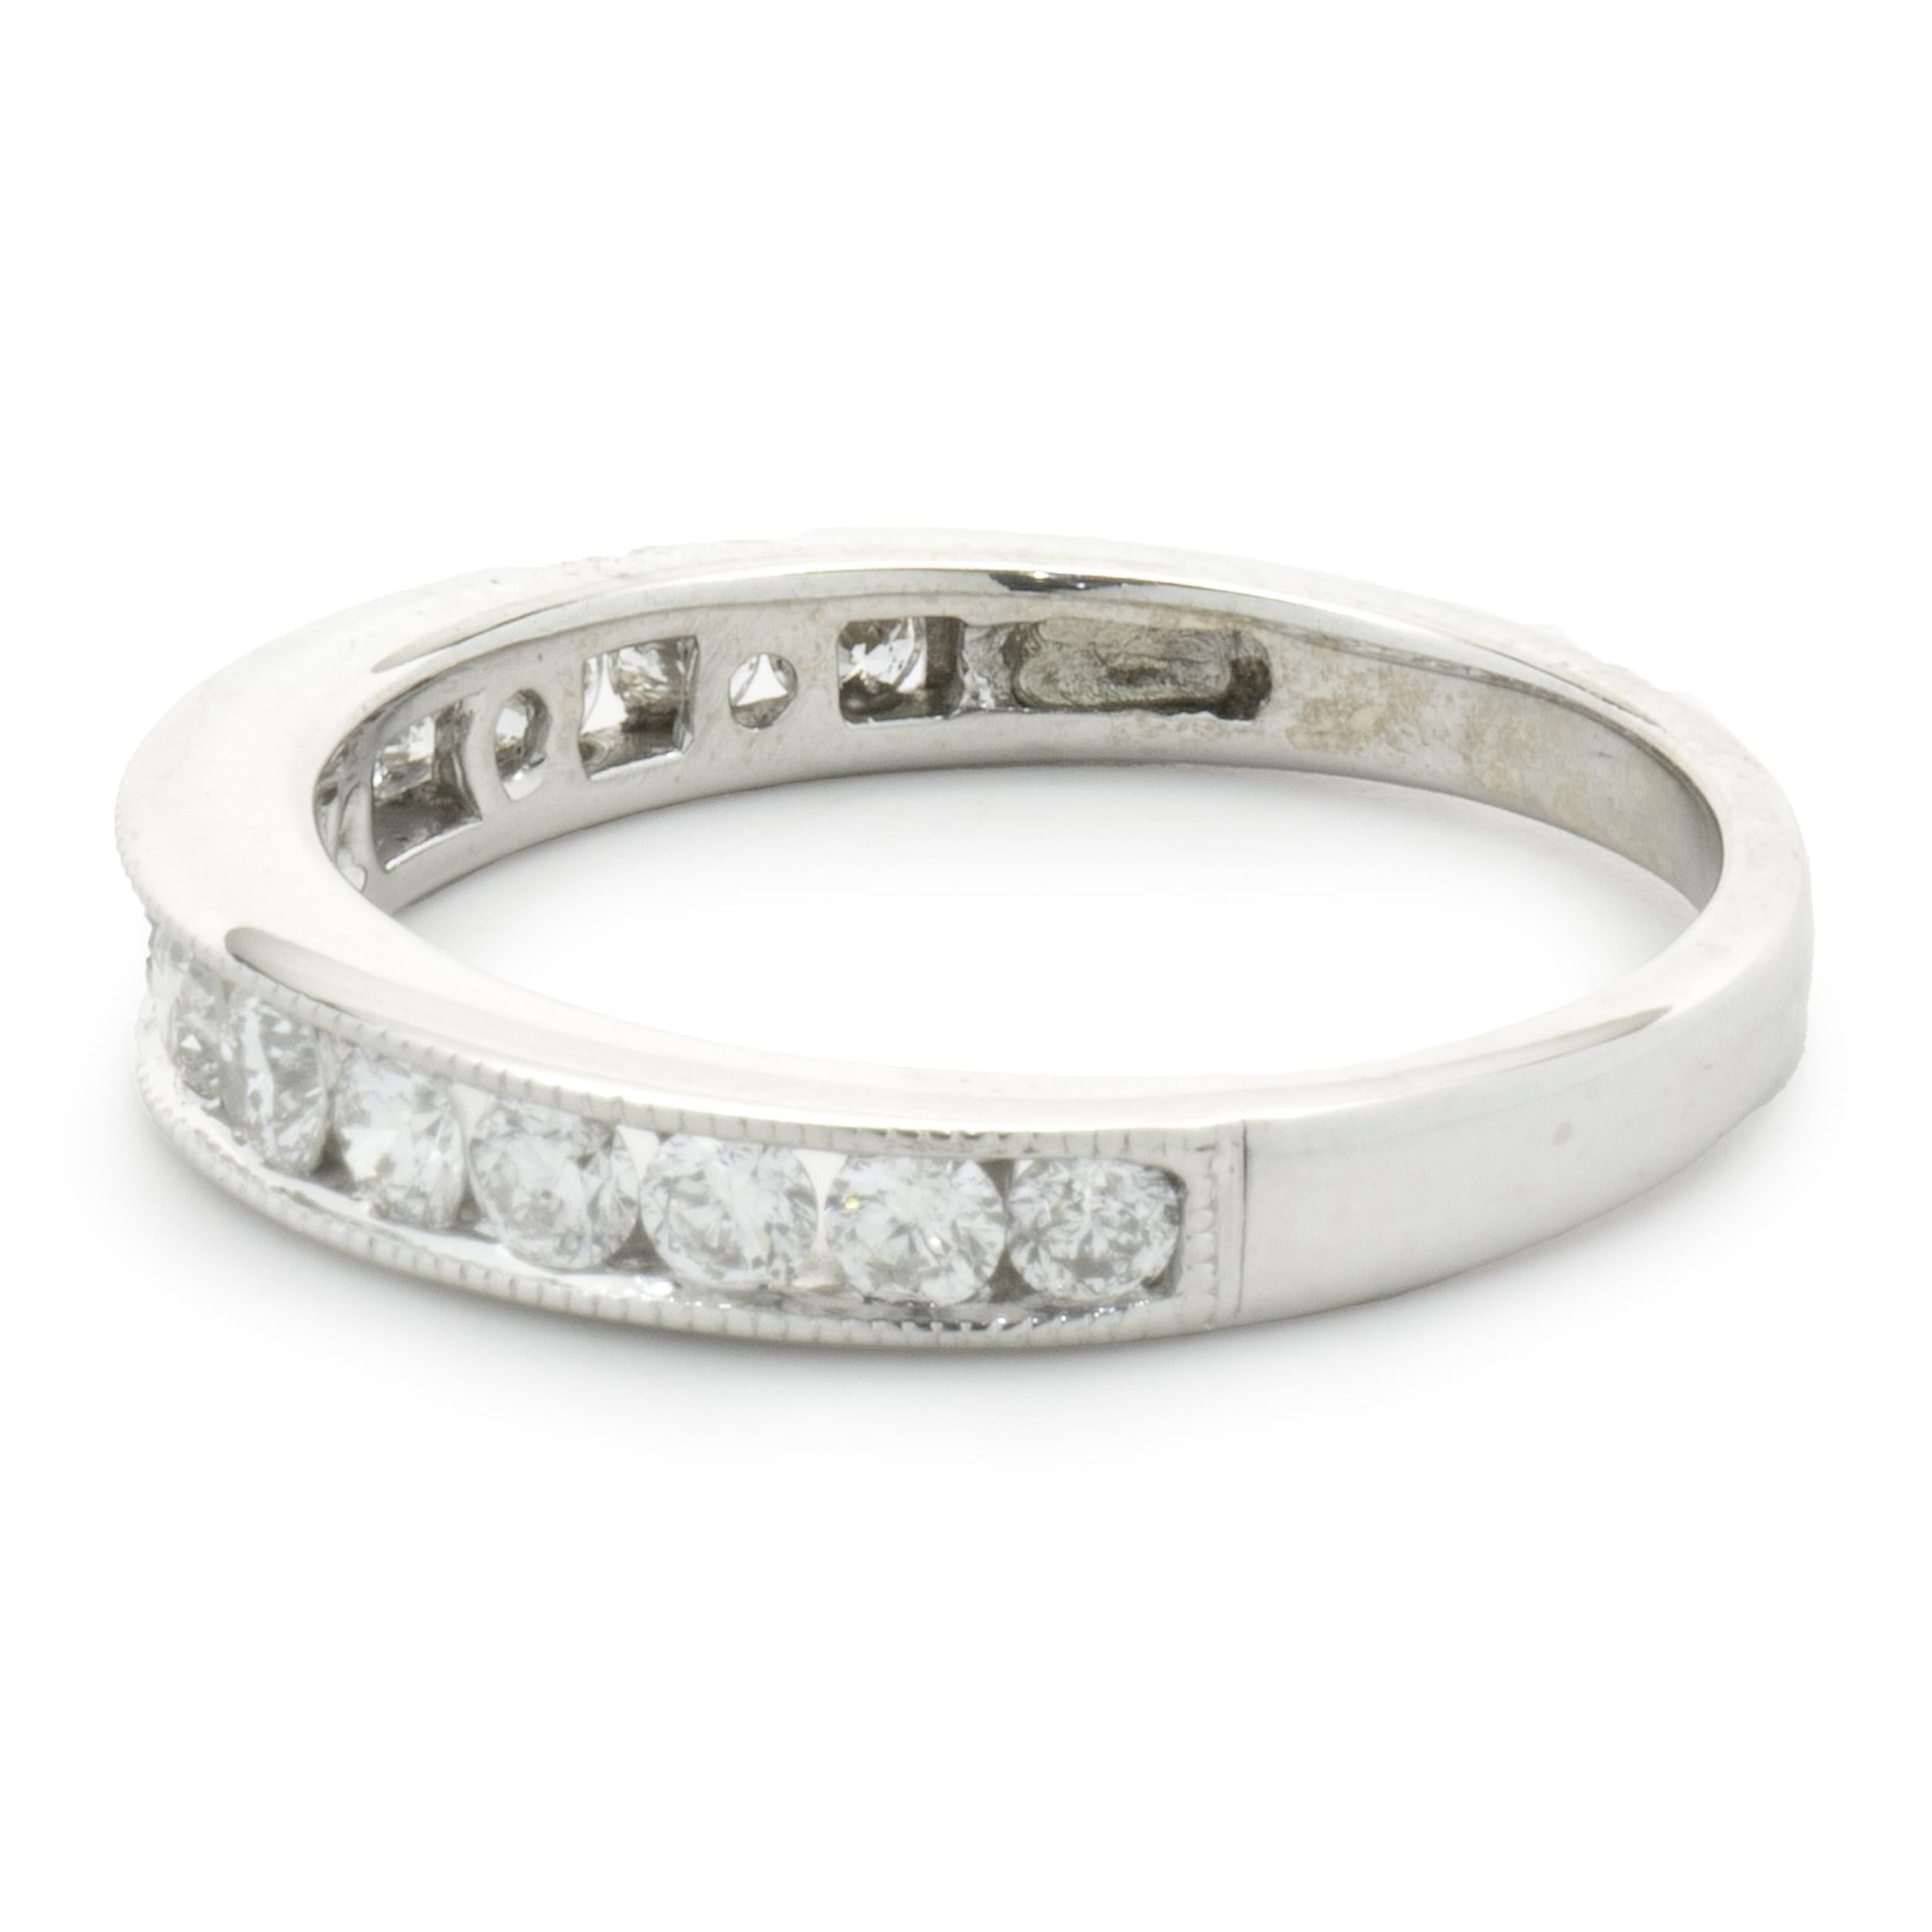 Designer: Custom
Material: 14K white gold
Diamonds: 14 round brilliant cut = 0.70cttw
Color: H
Clarity: SI2
Size: 6.75 sizing available 
Dimensions: ring measures 3.66mm in width
Weight: 2.80 grams